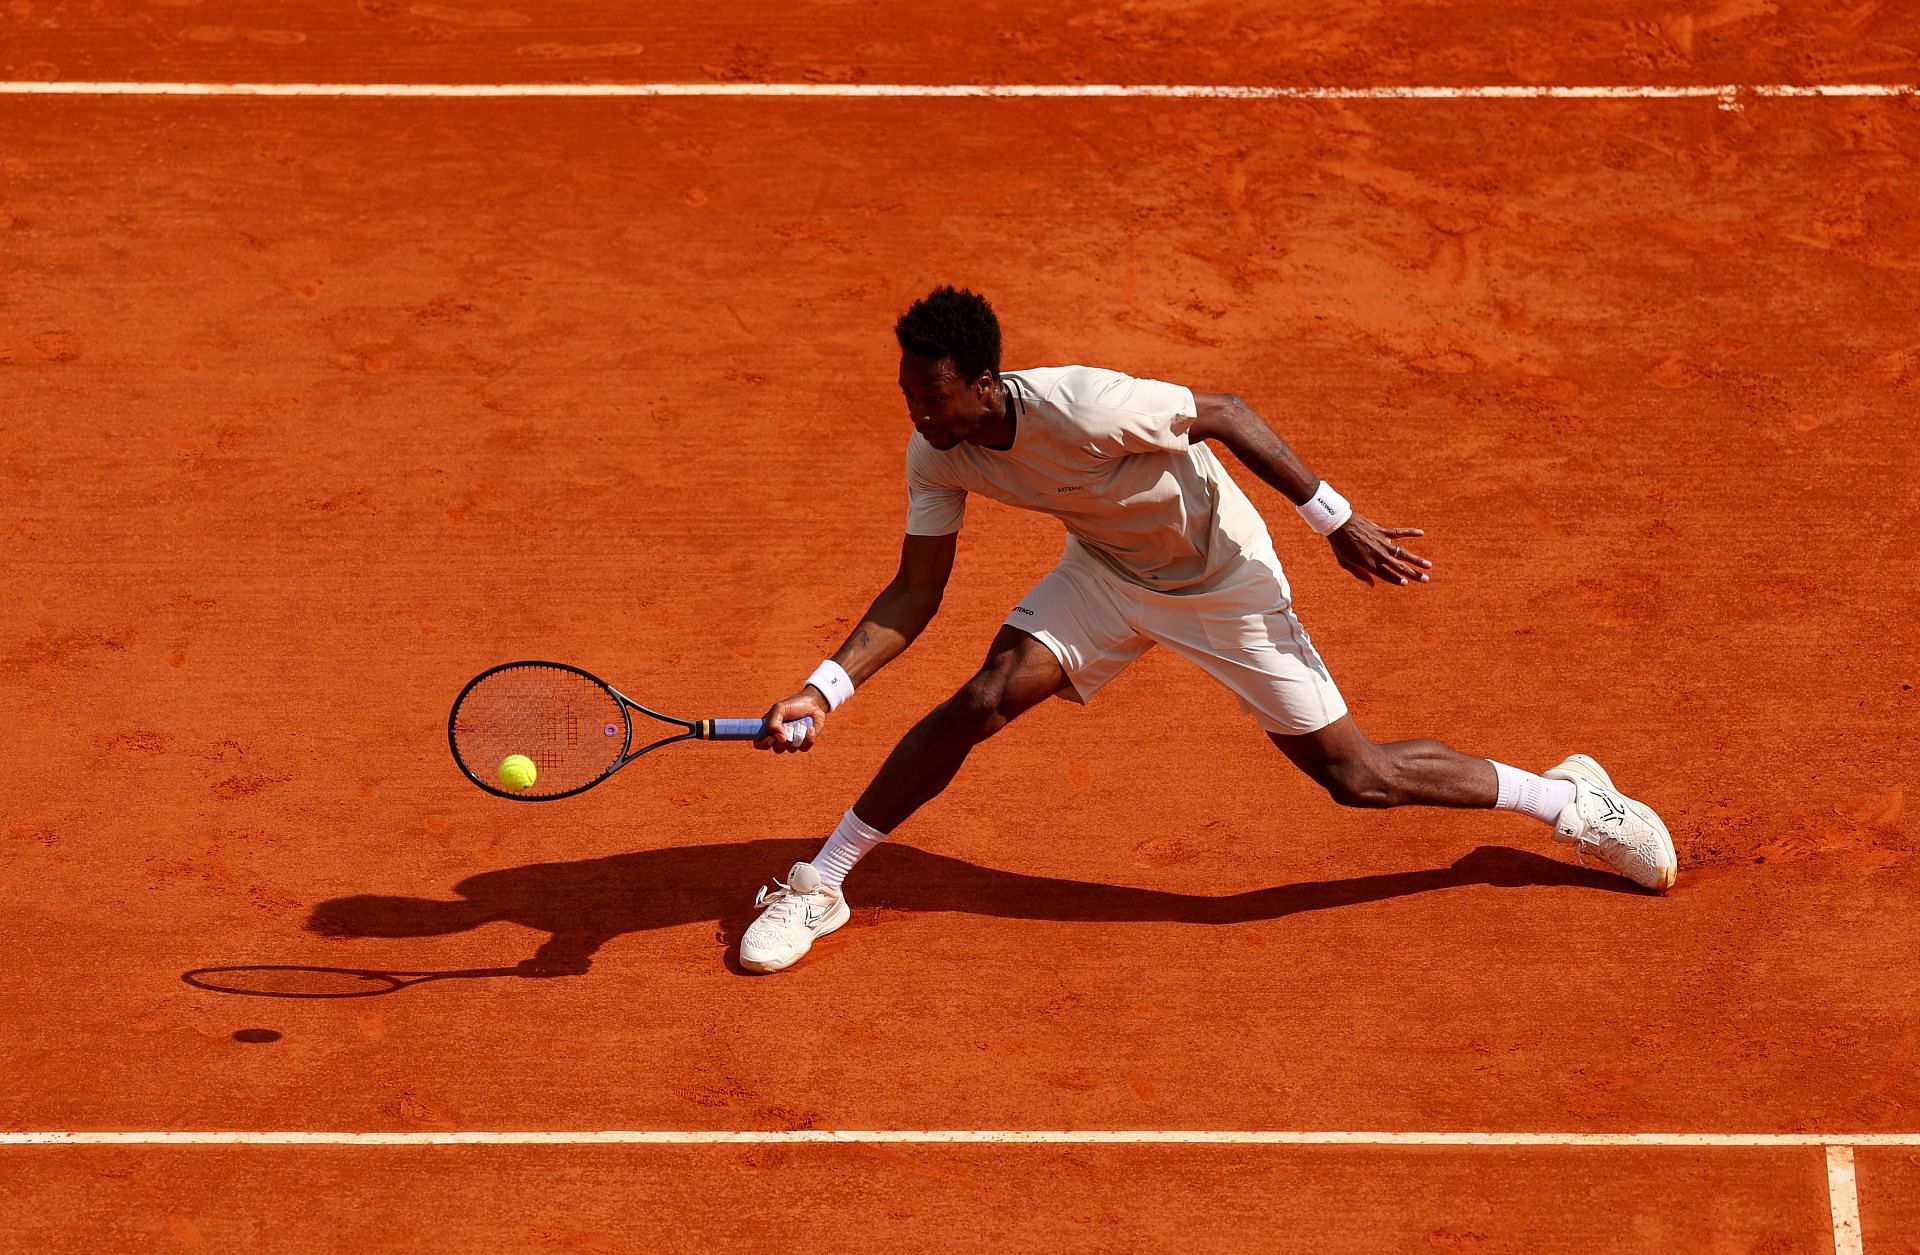 Monfils at the Rolex Monte-Carlo Masters - Day Four